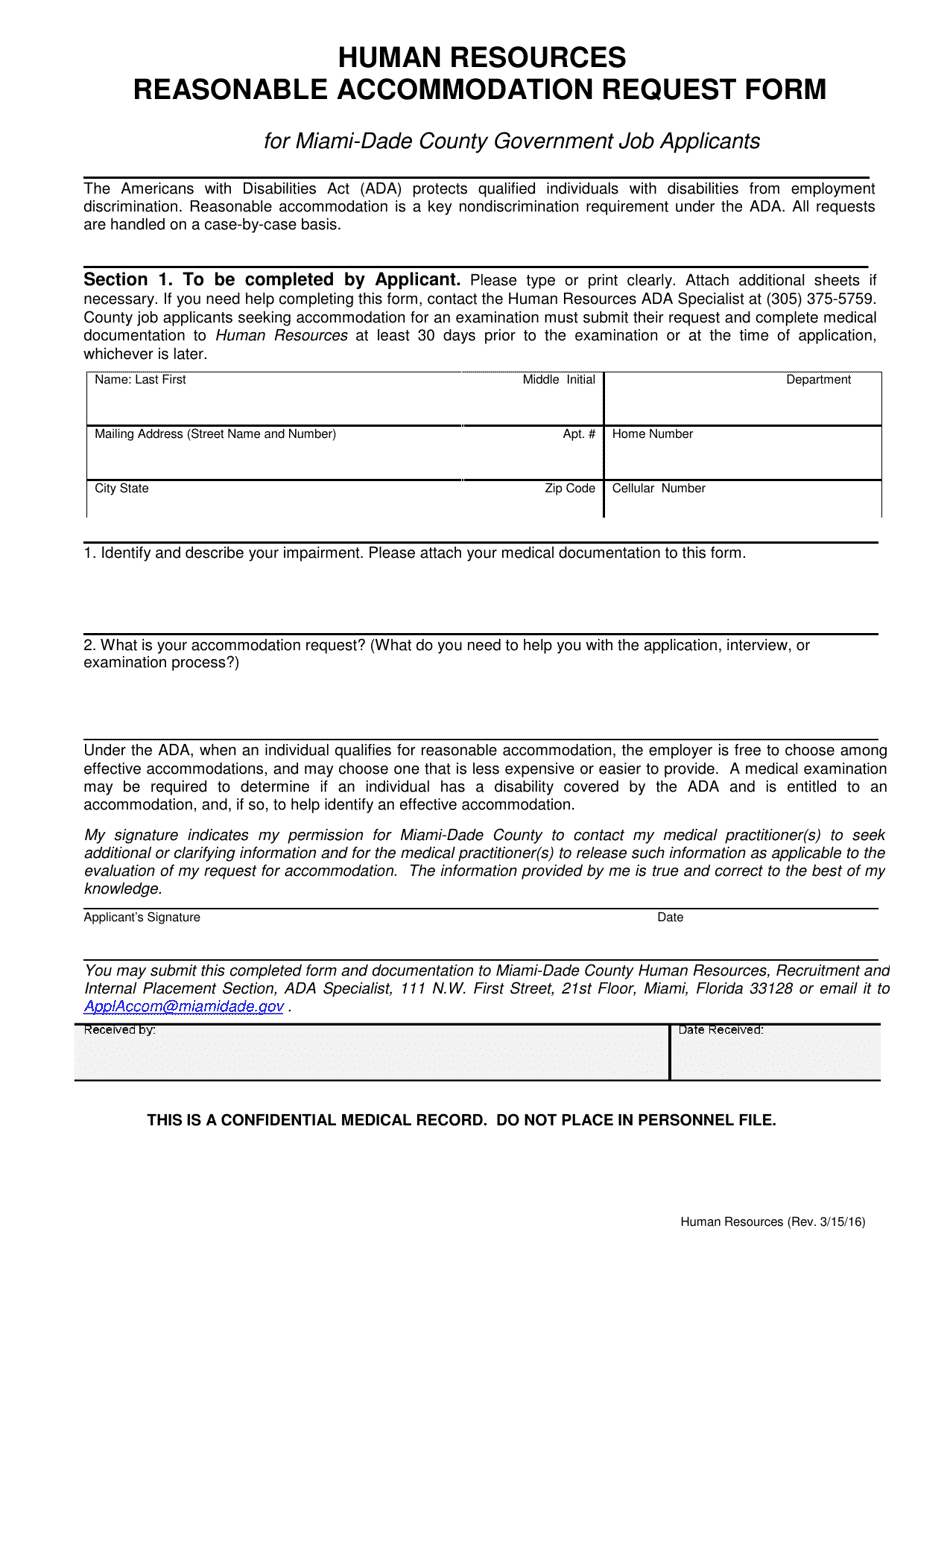 Human Resources Reasonable Accommodation Request Form for Miami-Dade County Government Job Applicants - Miami-Dade County, Florida, Page 1